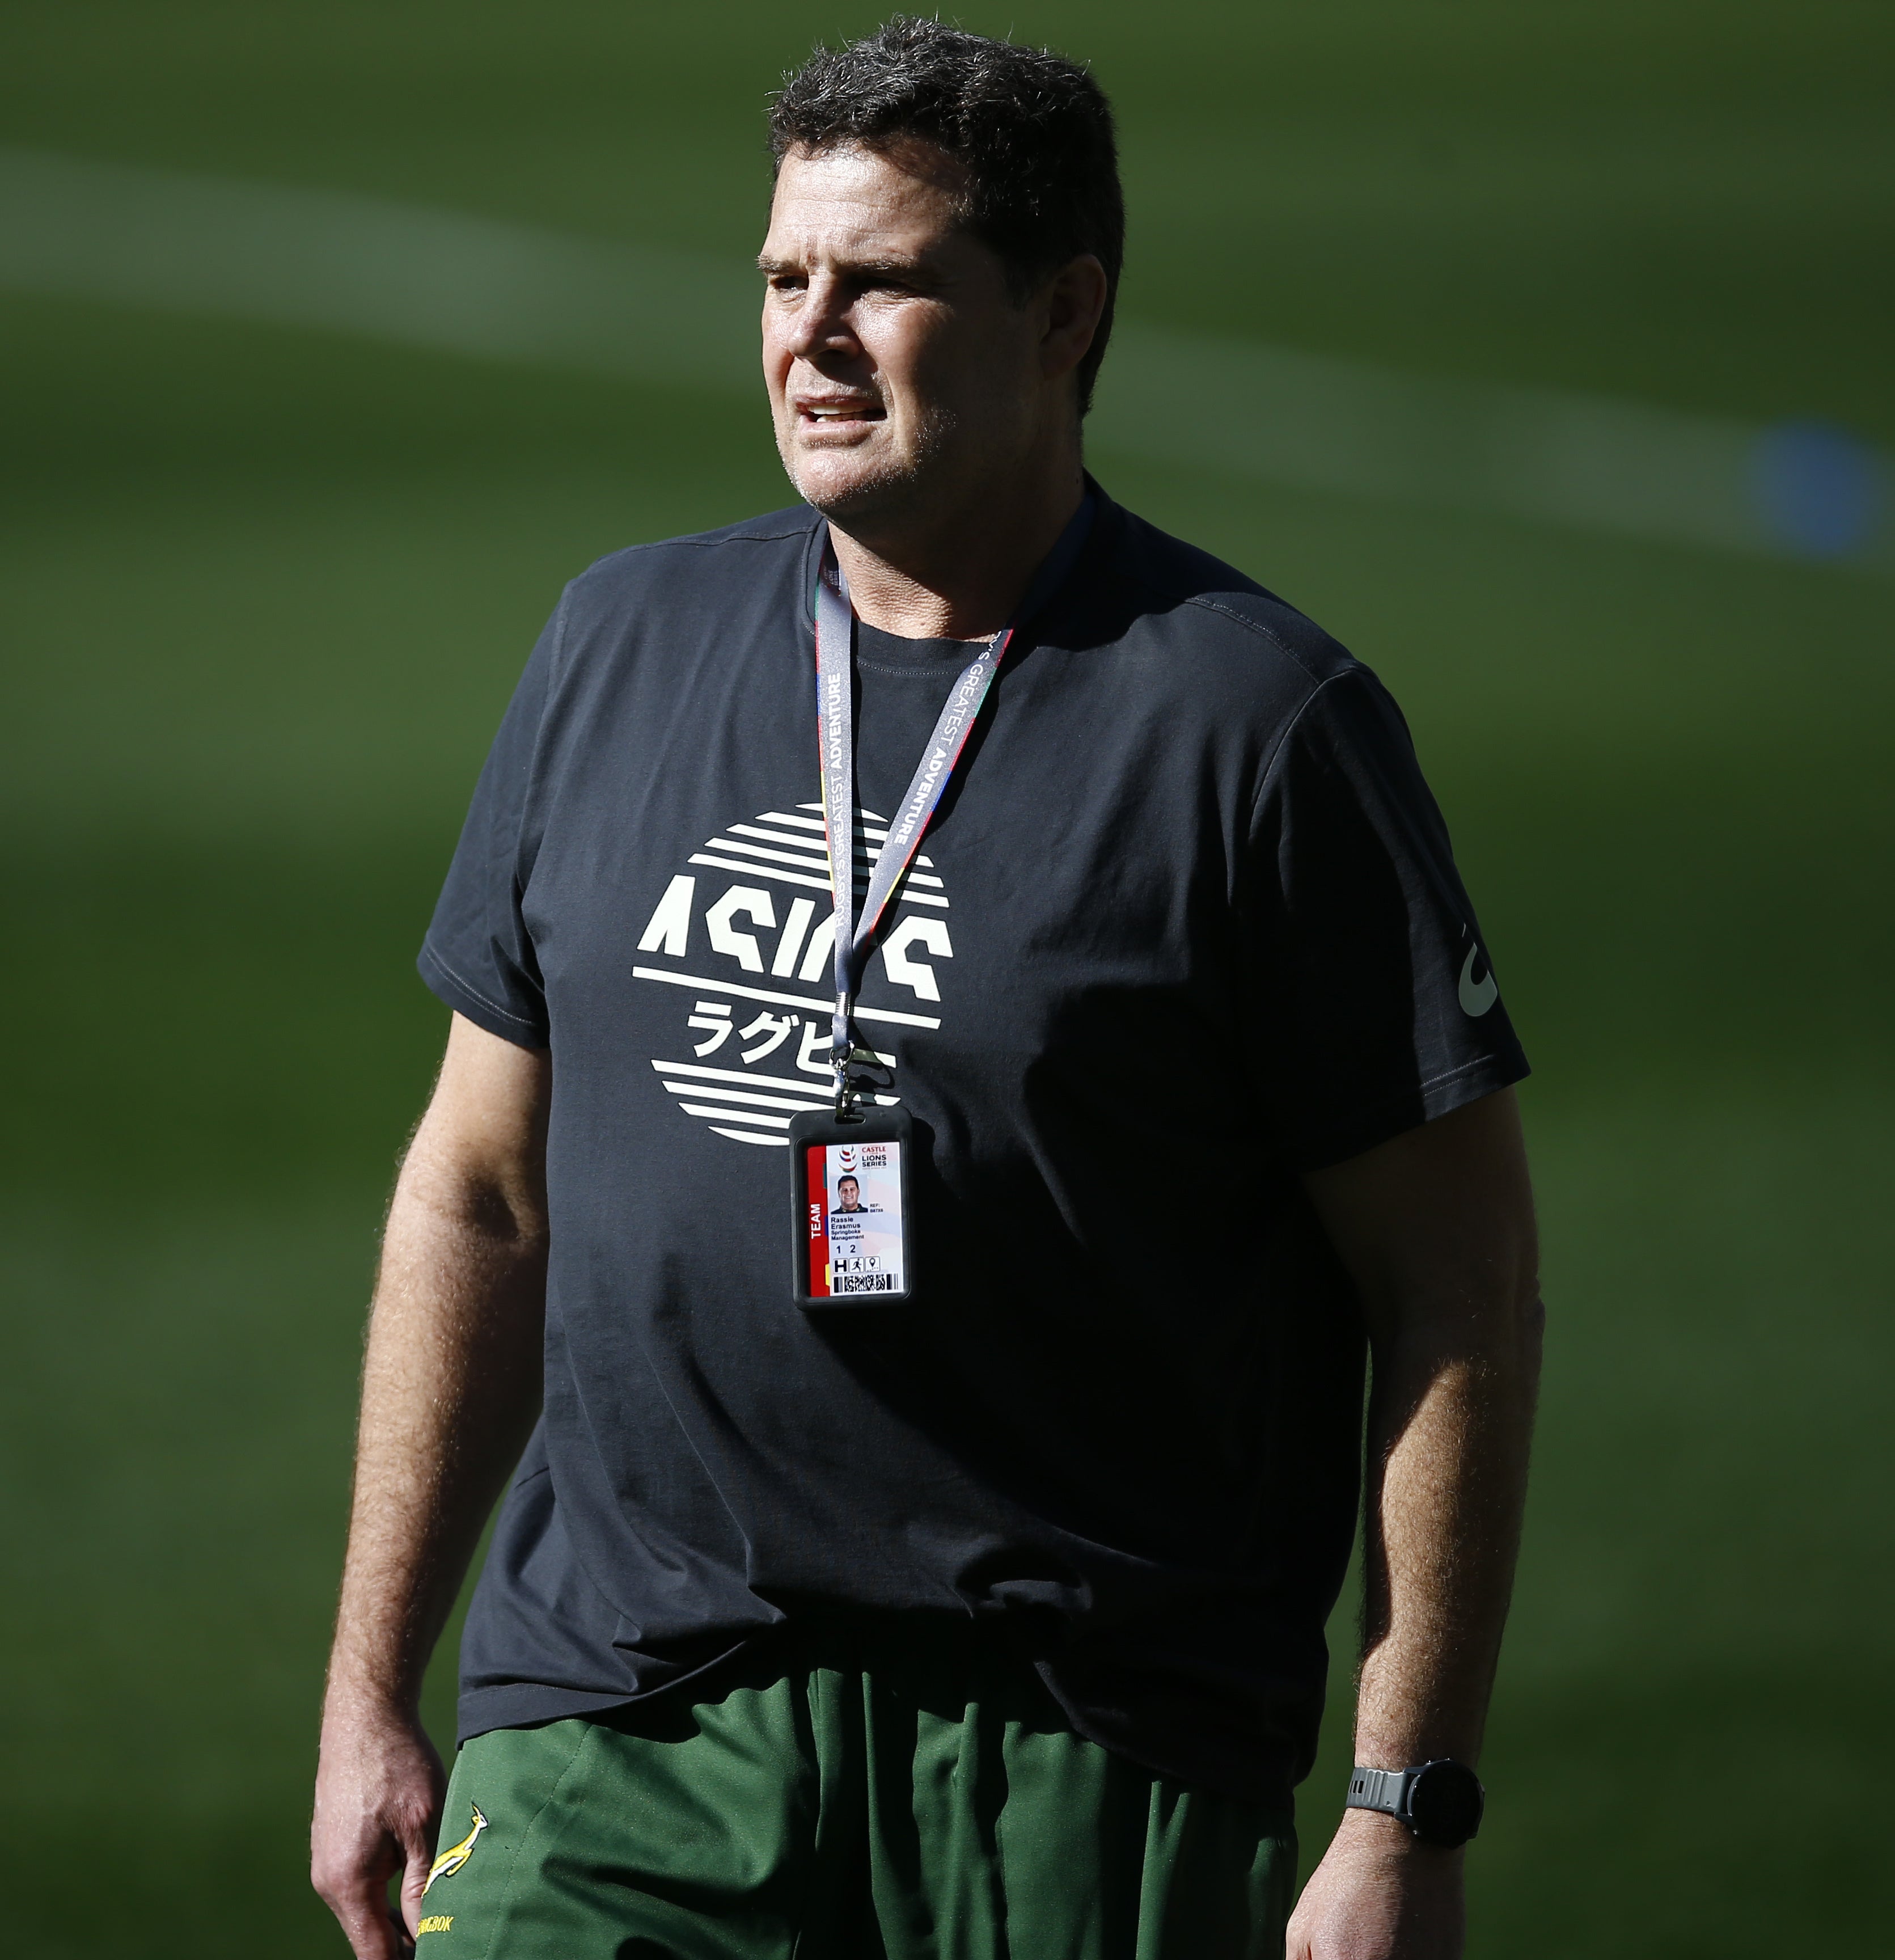 Rassie Erasmus has been criticising the Lions on Twitter (Steve Haag/PA)